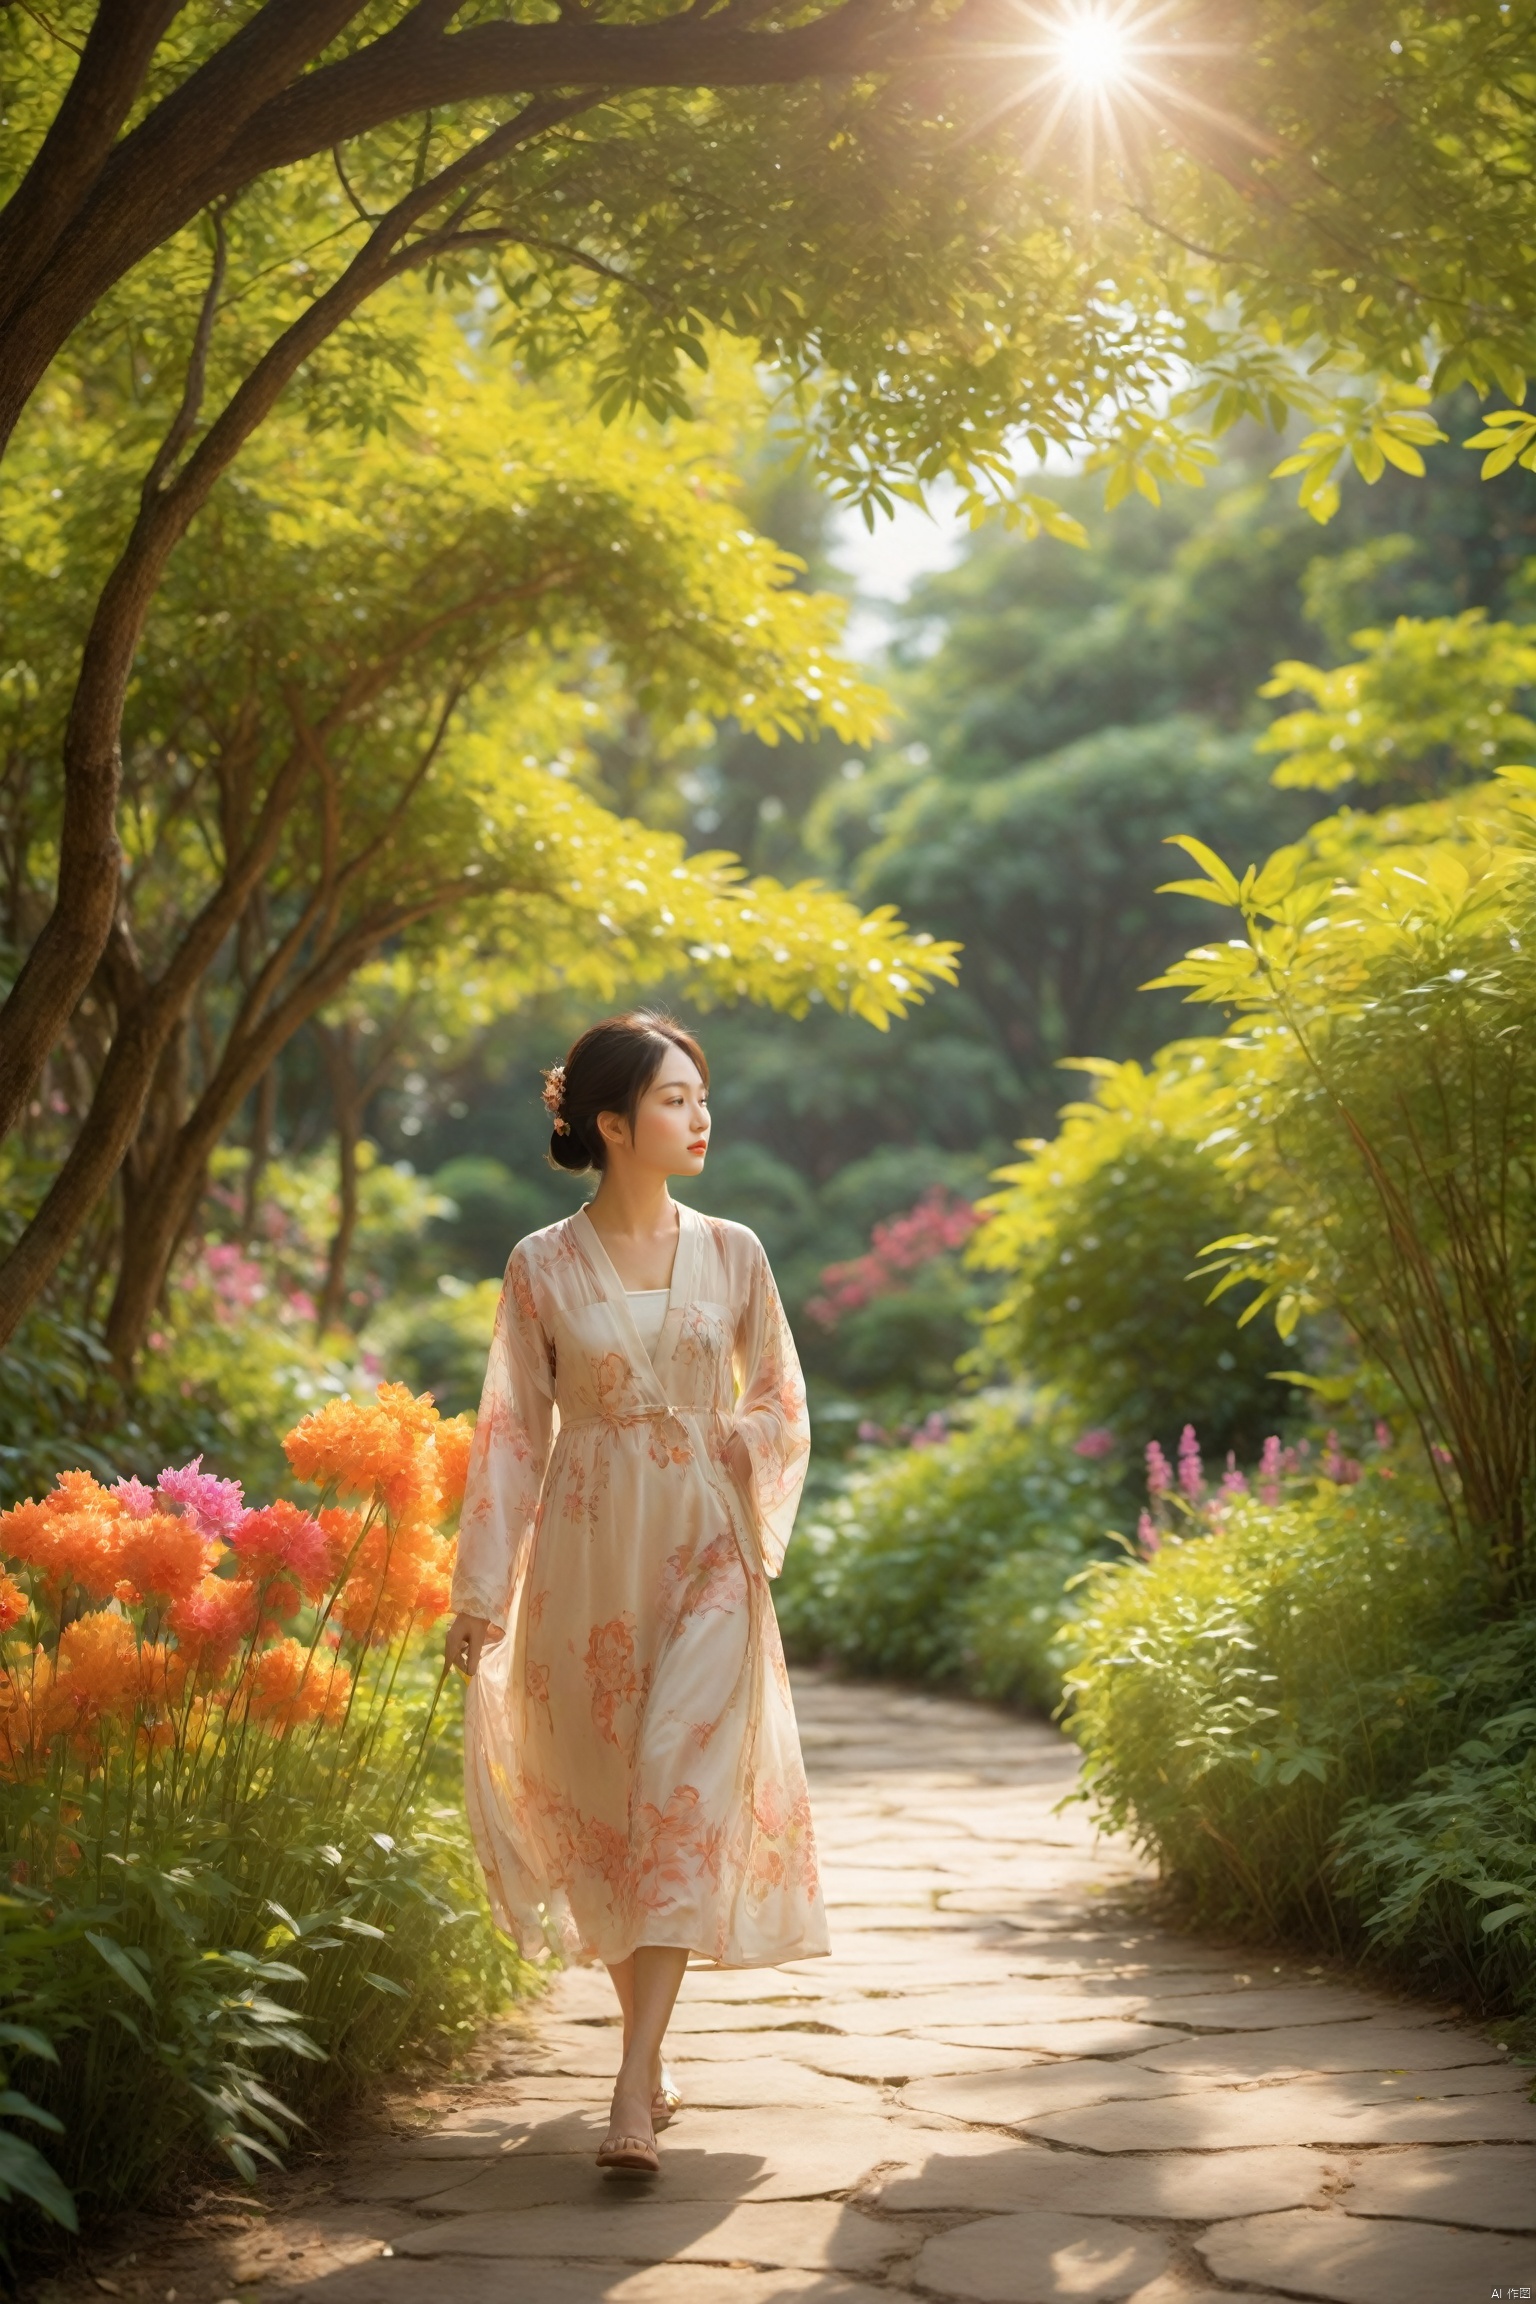 A young Chinese woman walks along a winding path in a botanical garden, her eyes taking in the vibrant colors of the flowers and the intricate patterns of the leaves. The sun filters through the canopy, casting a dappled light on her path. She moves with a sense of contentment, her mind at ease, as if in harmony with the natural world. The scene is a peaceful journey, a stroll through the beauty of nature.